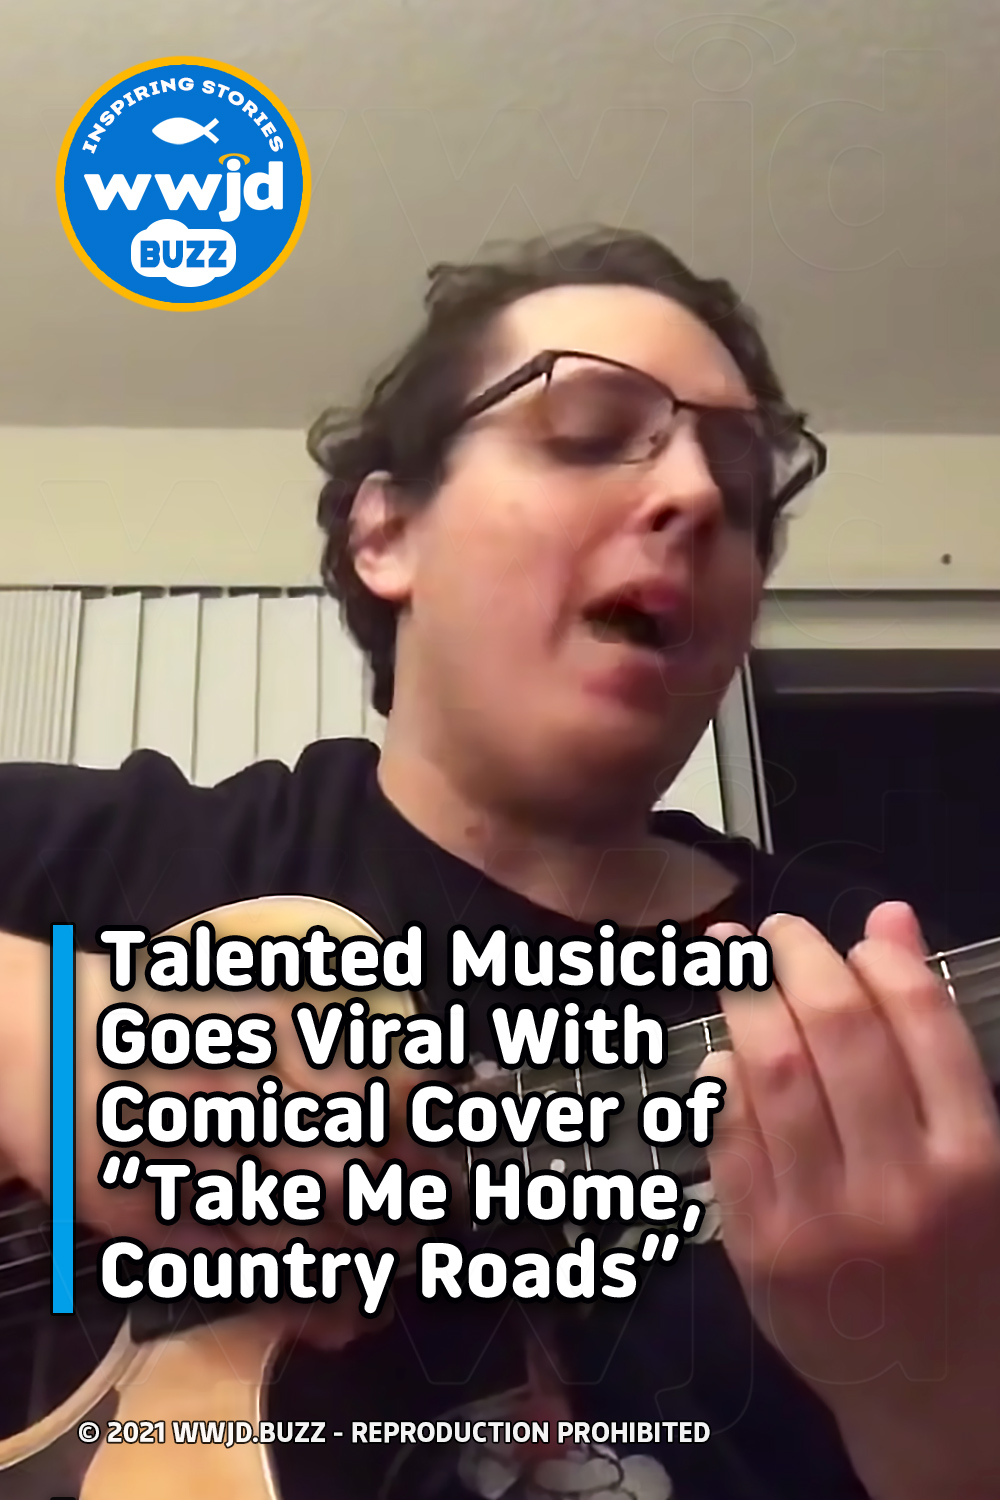 Talented Musician Goes Viral With Comical Cover of “Take Me Home, Country Roads”